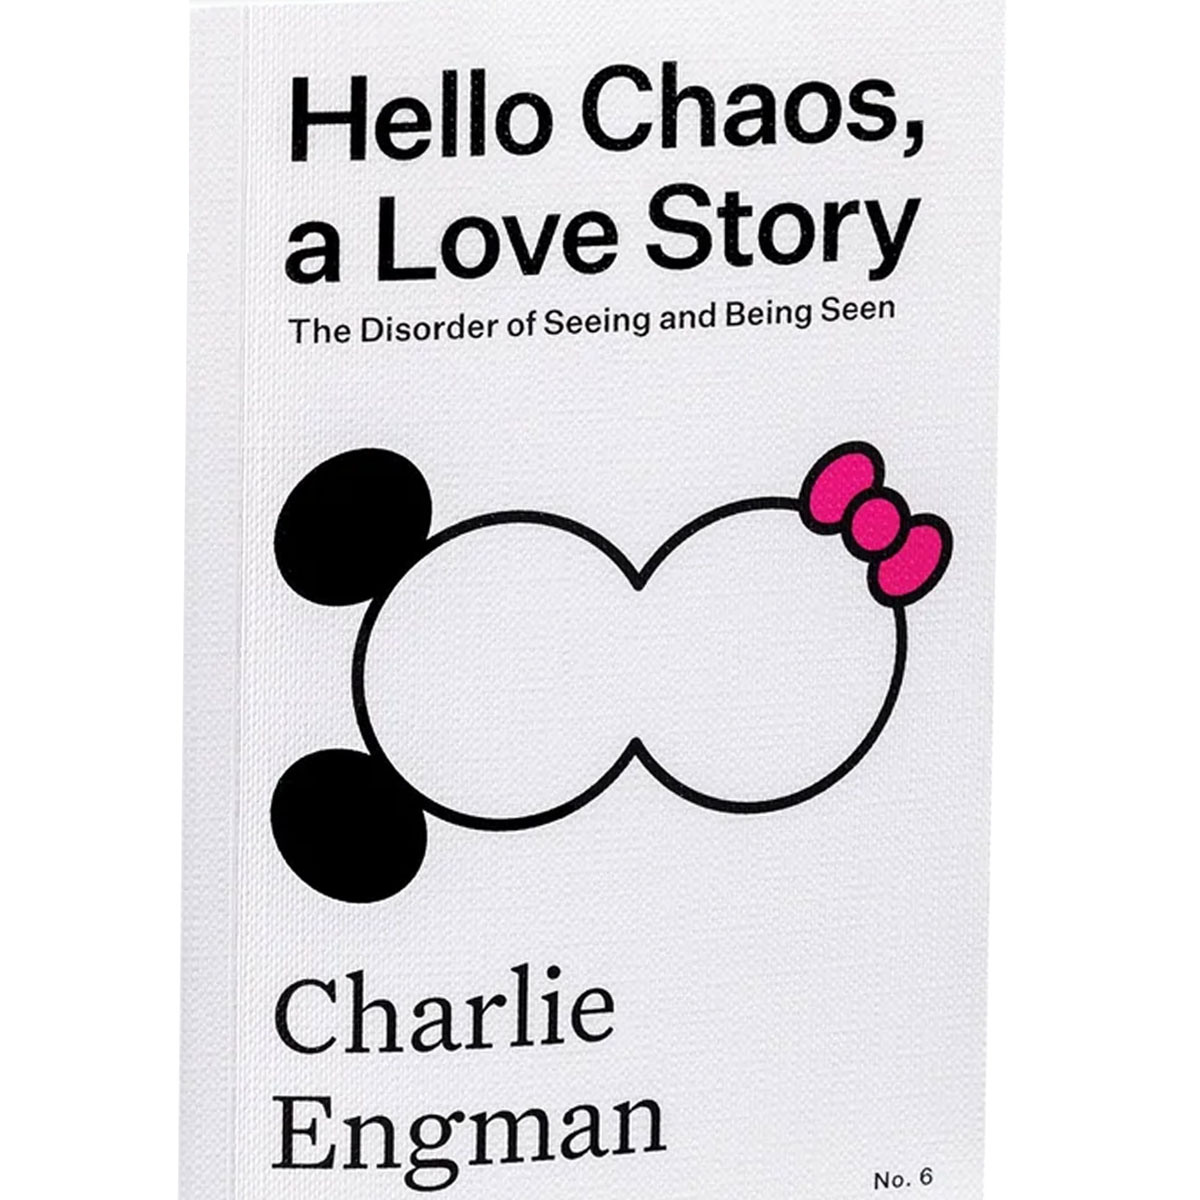 Hello Chaos, a Love Story: The Disorder of Seeing and Being Seen Charlie Engman SPBH Editions